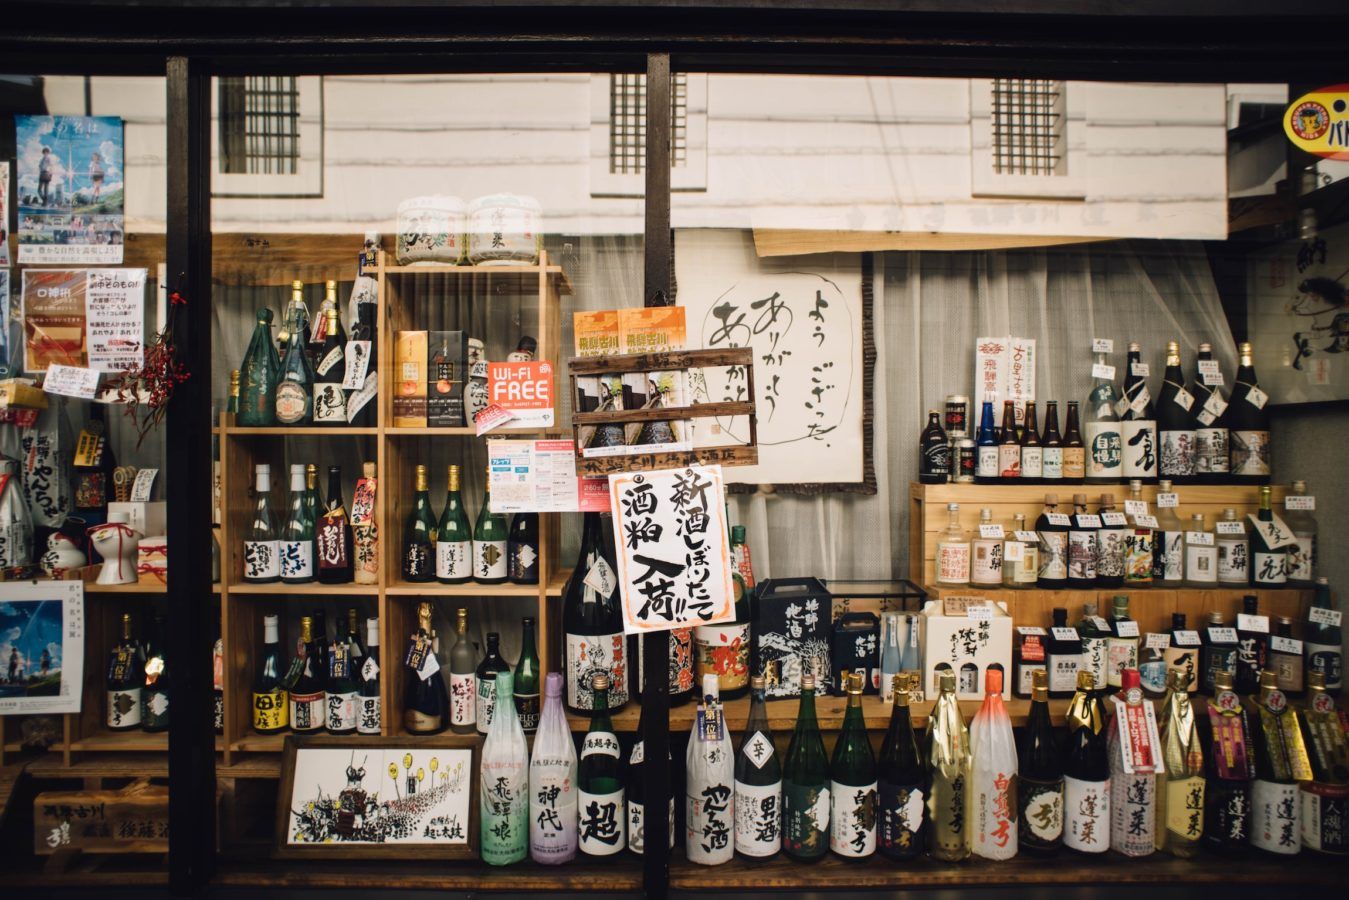 Get transported to Japan with these 9 best sake bars in Singapore